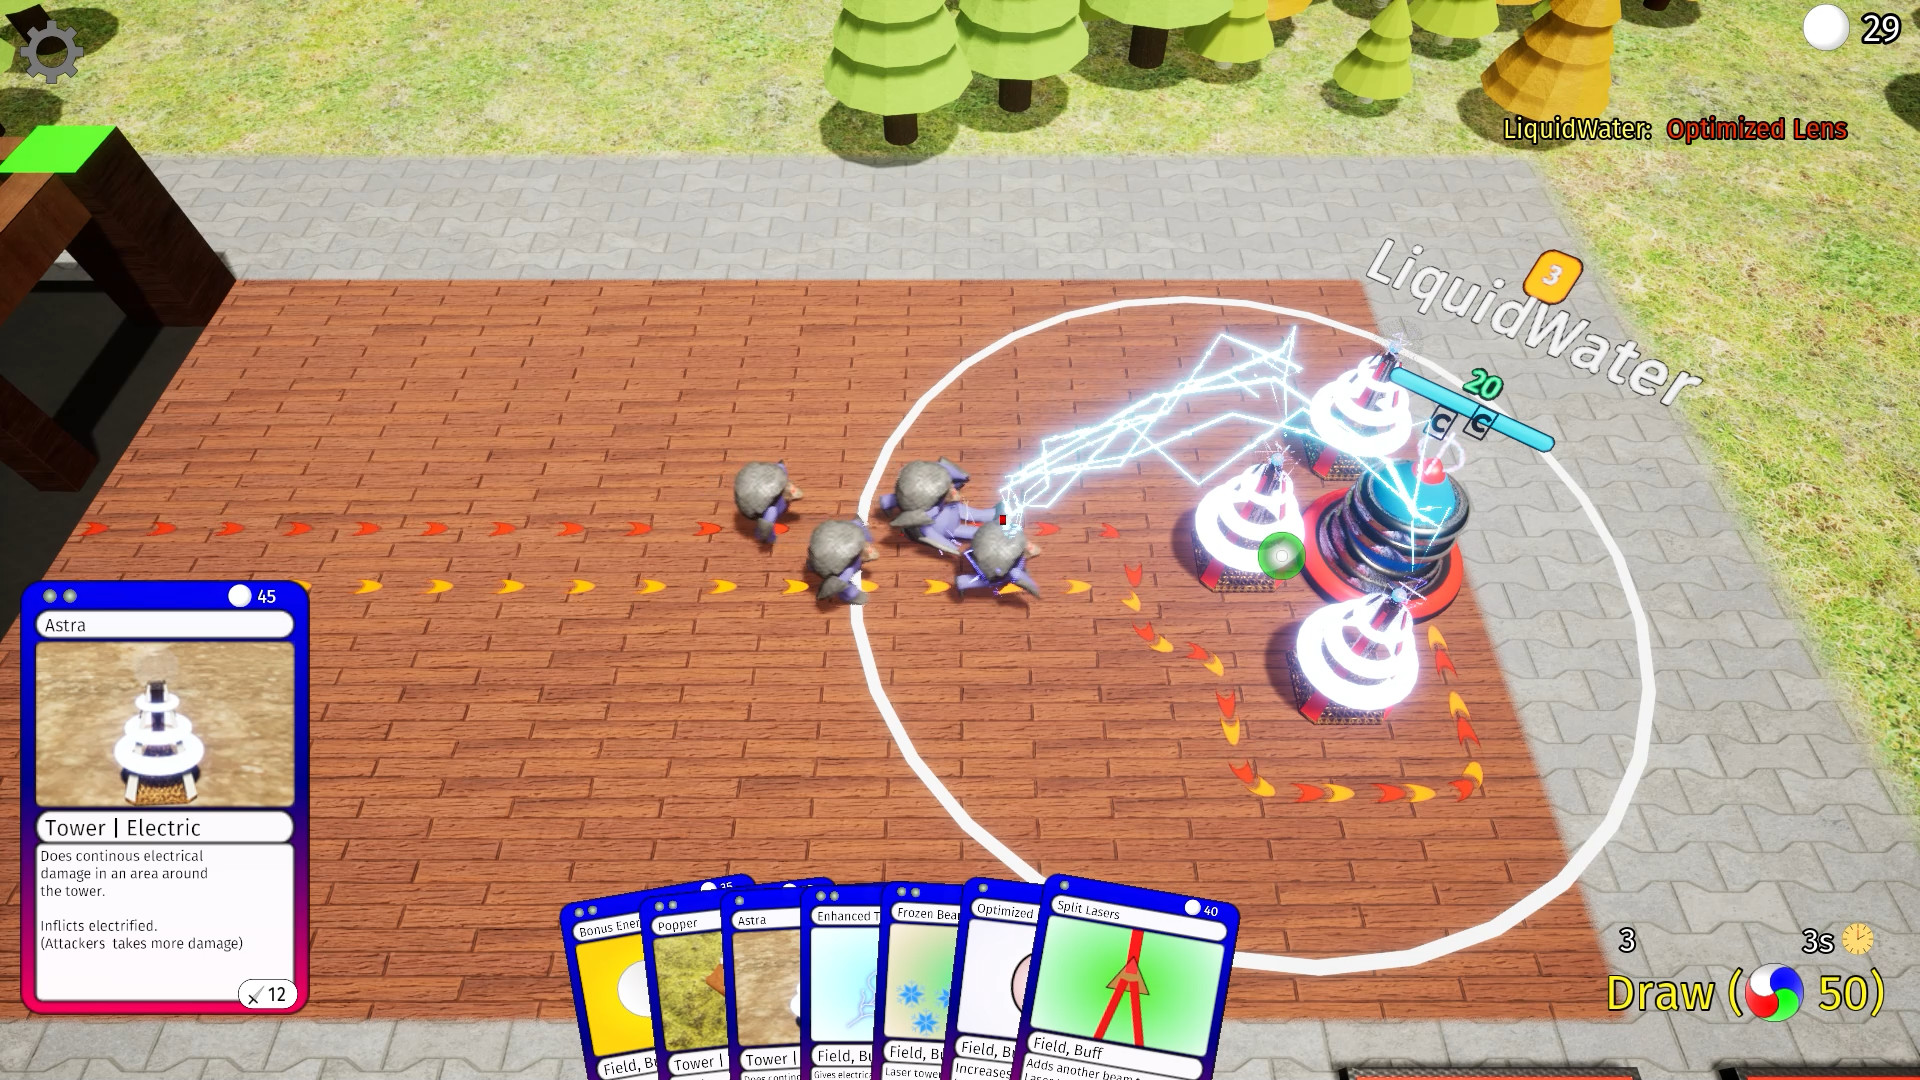 Card Tower Defence on Steam